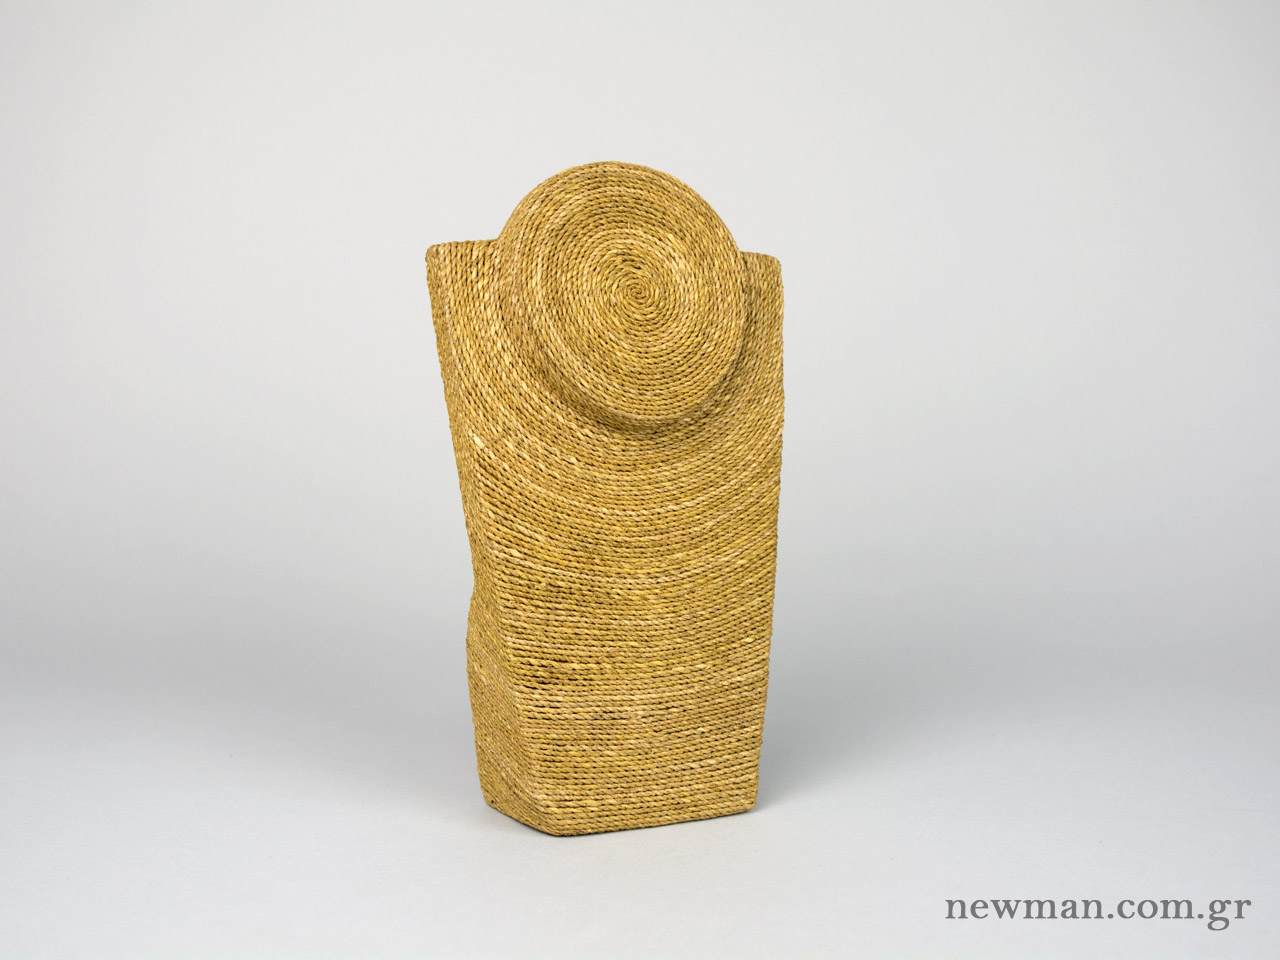 A jewellery stand made of twine, 20 cm height.